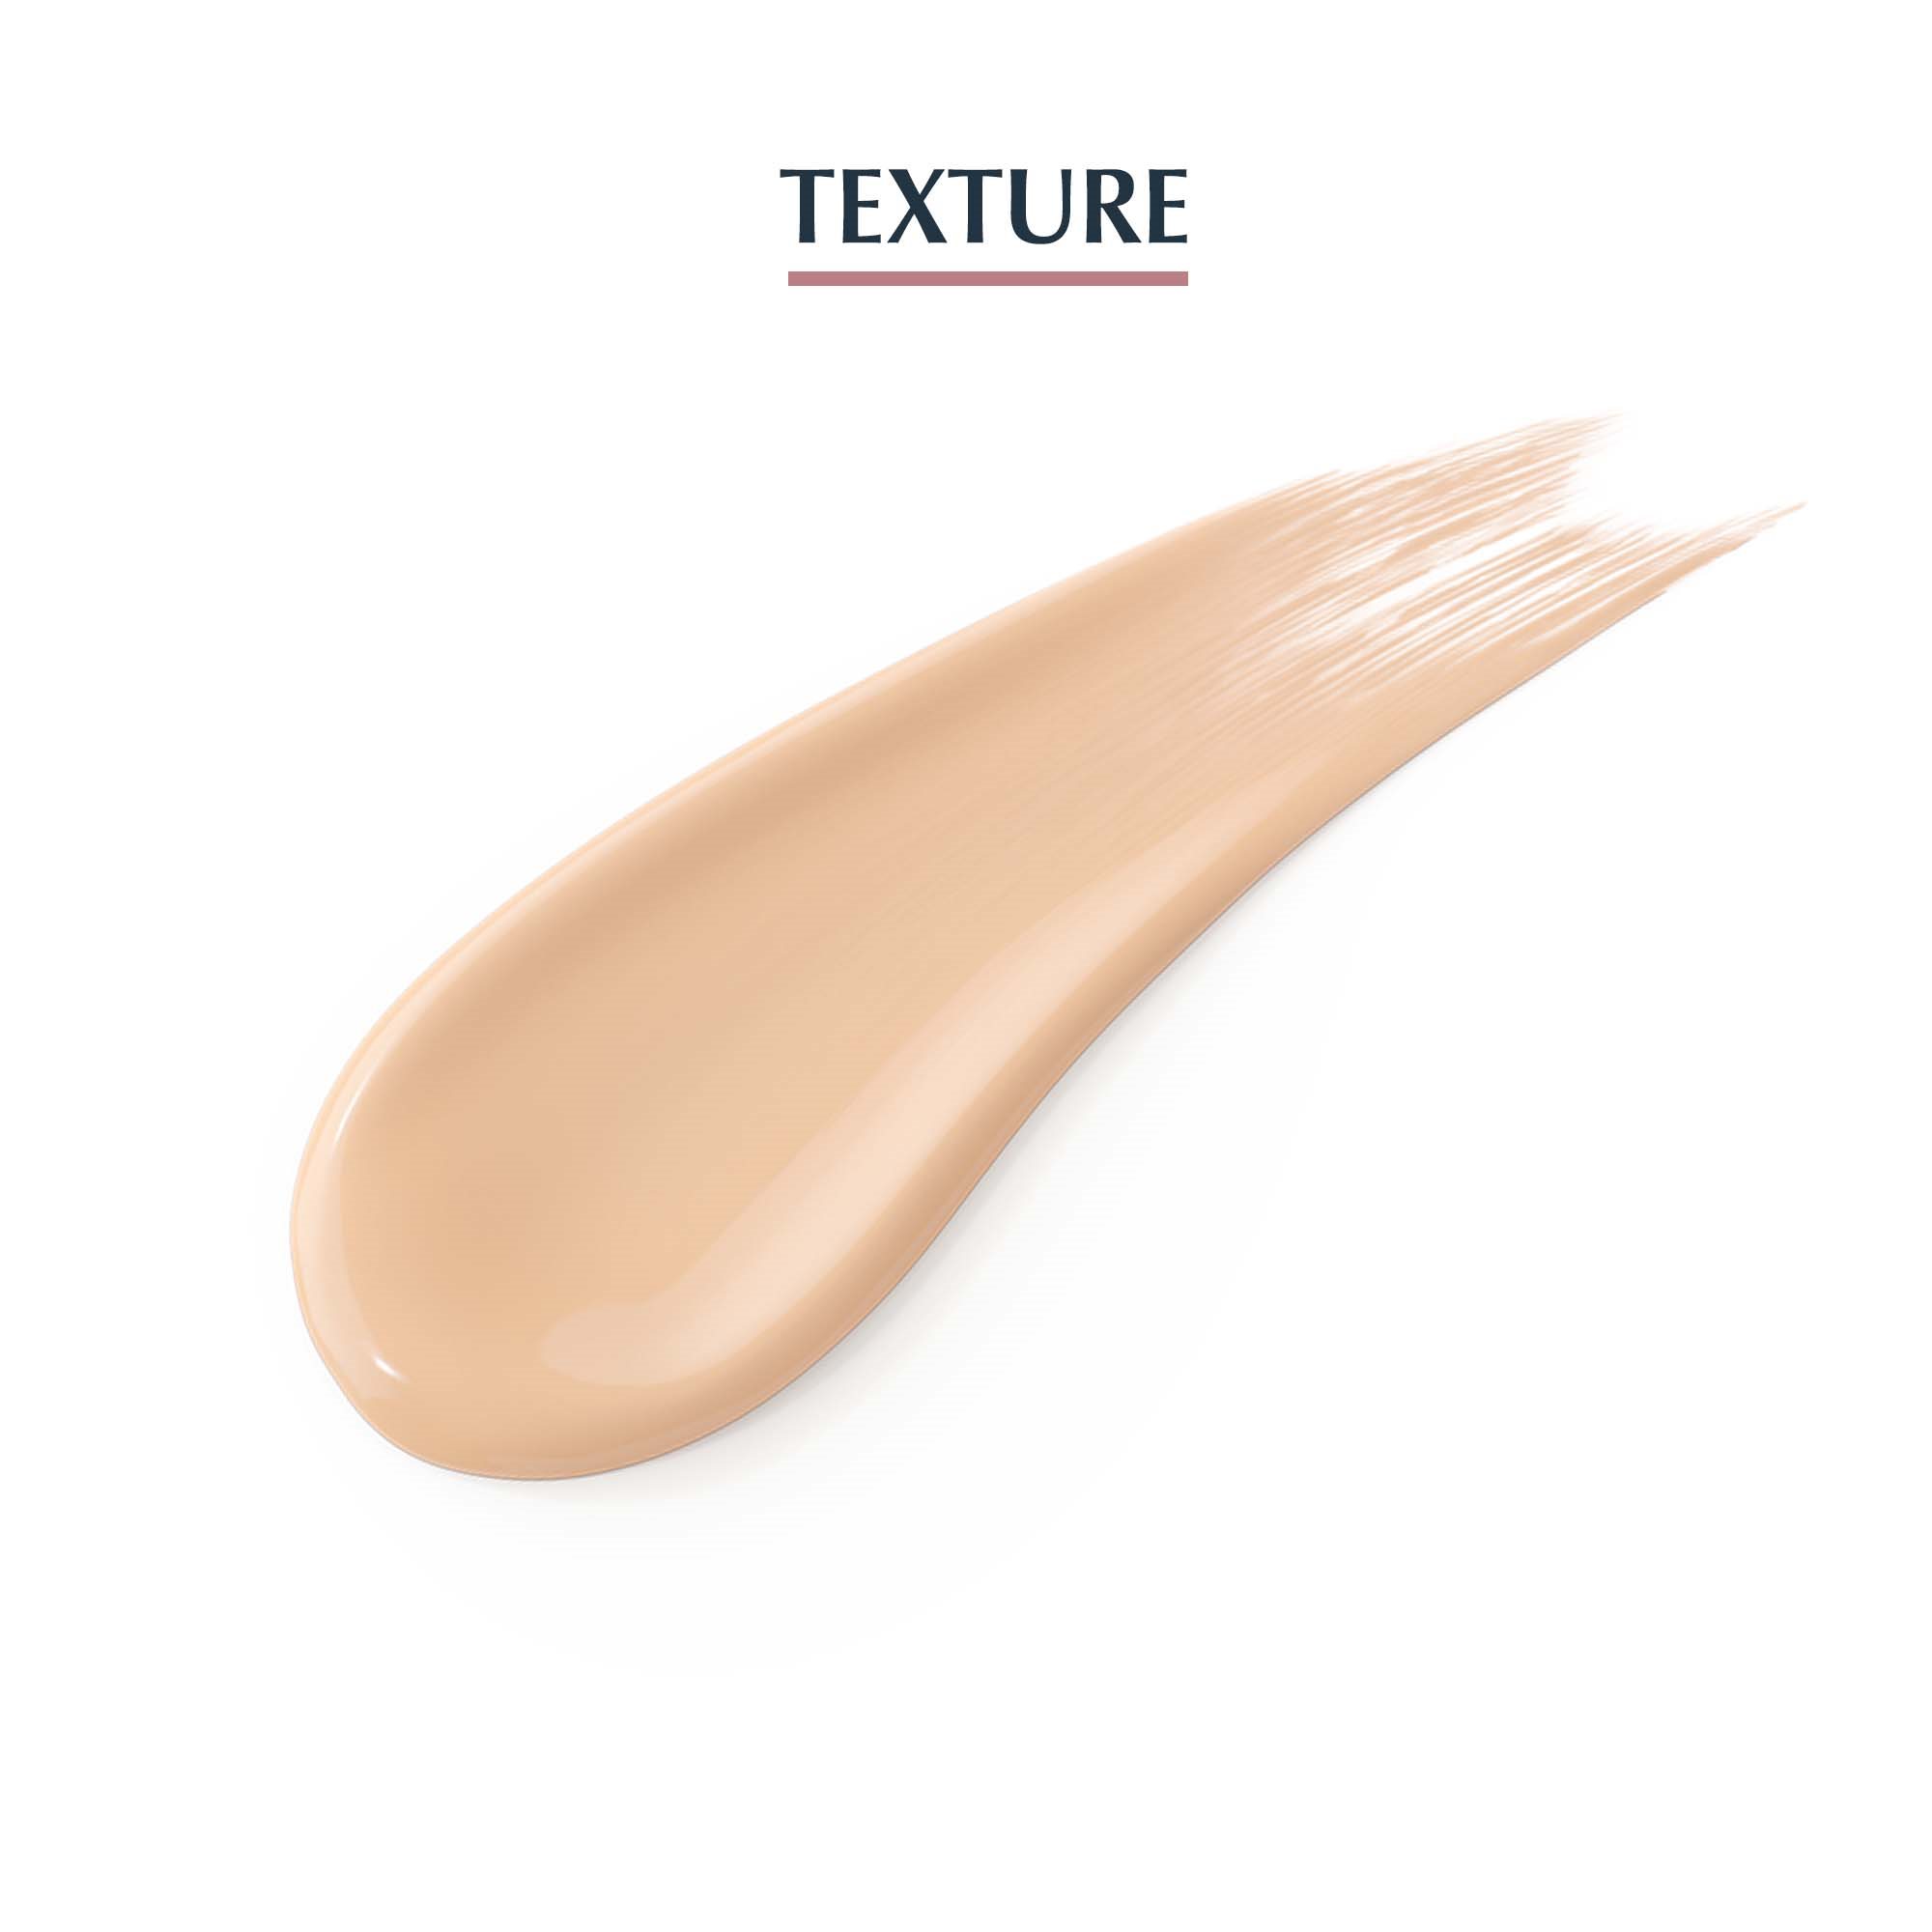 Eucerin Anti-Pigment Day SPF 30 Tinted Light has a smooth texture and contains mineral colour pigments.